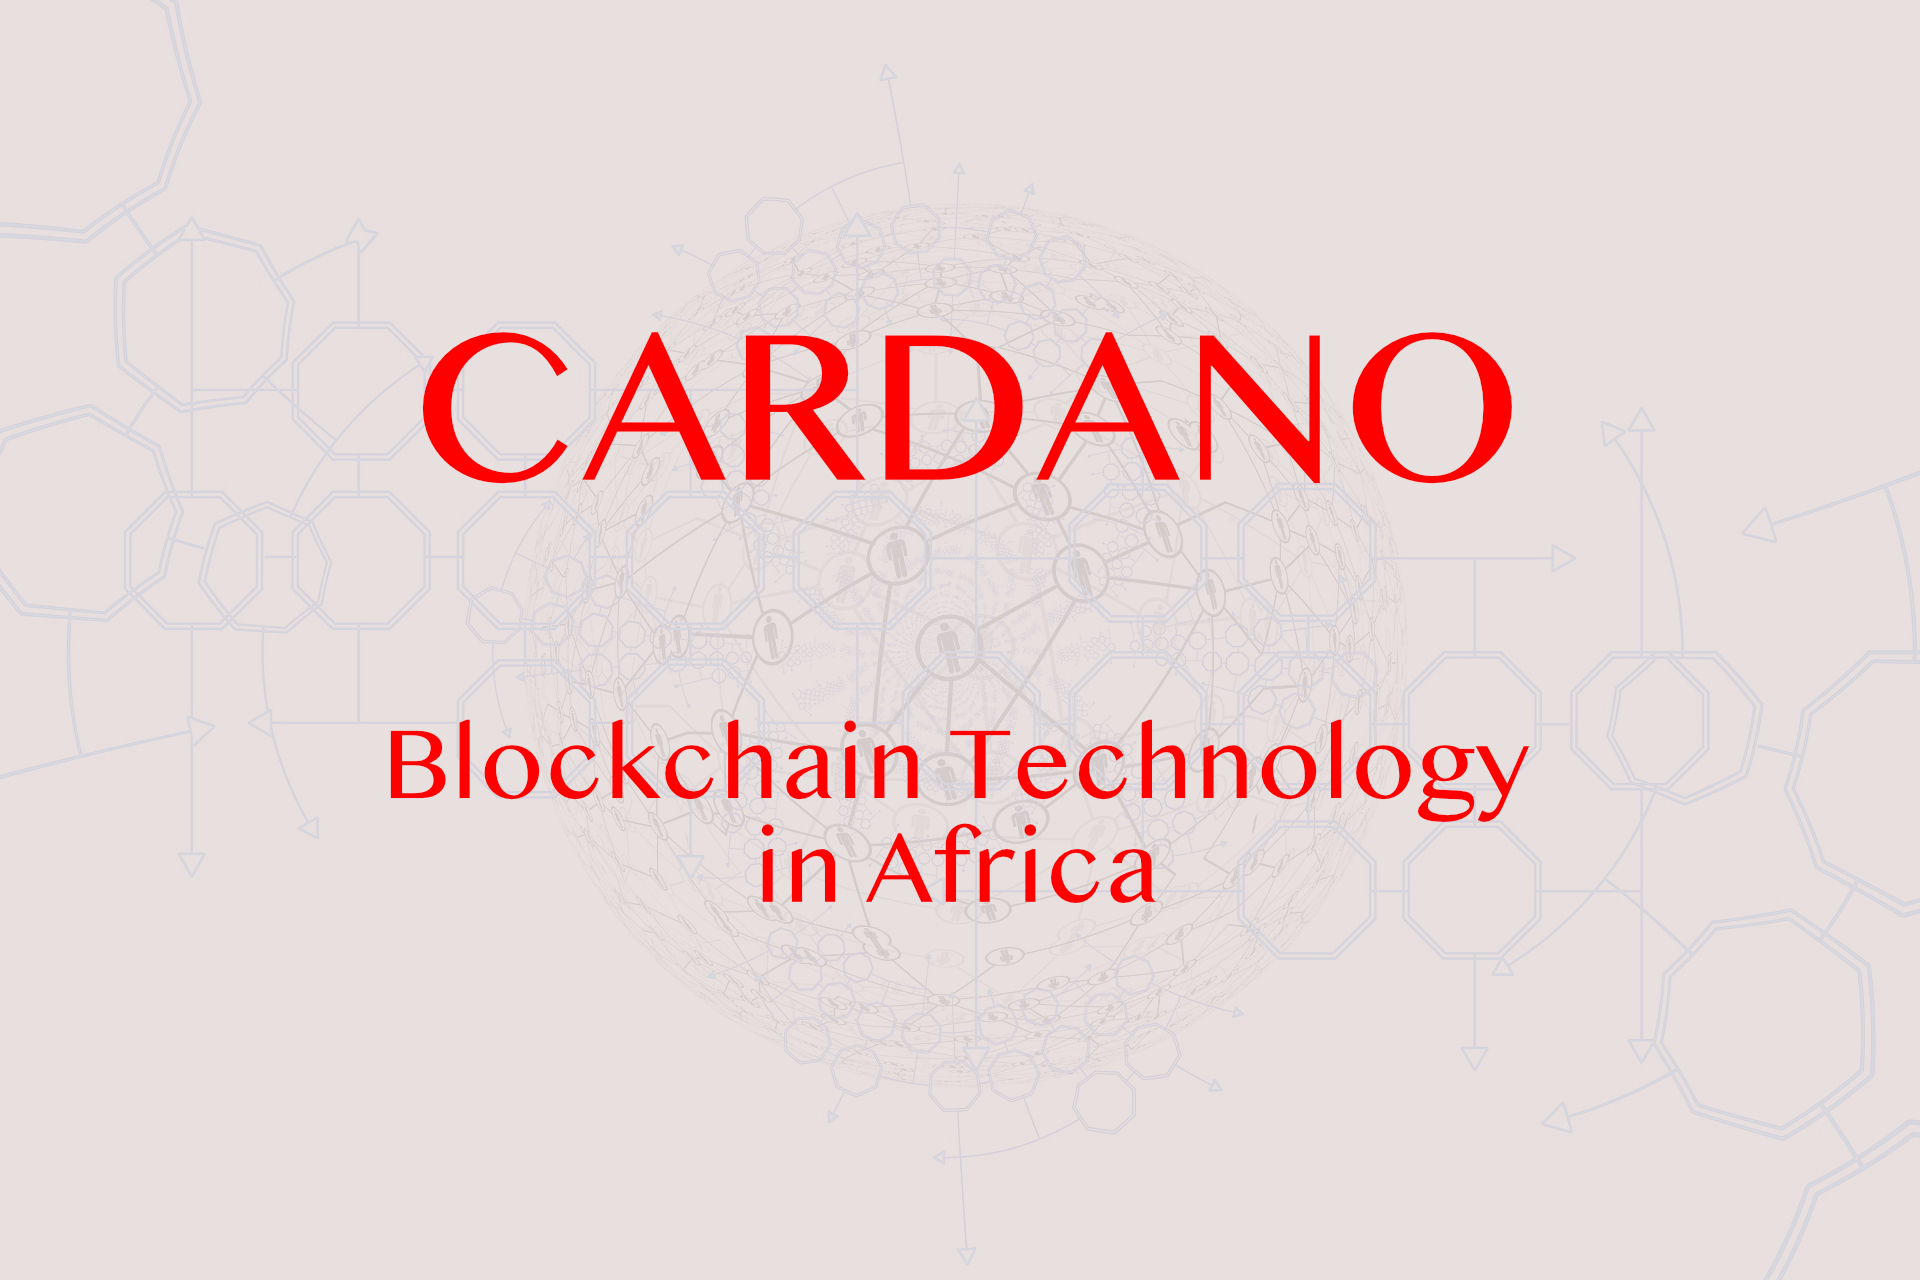 Blockchain Technology: How is Cardano Blockchain used in Africa